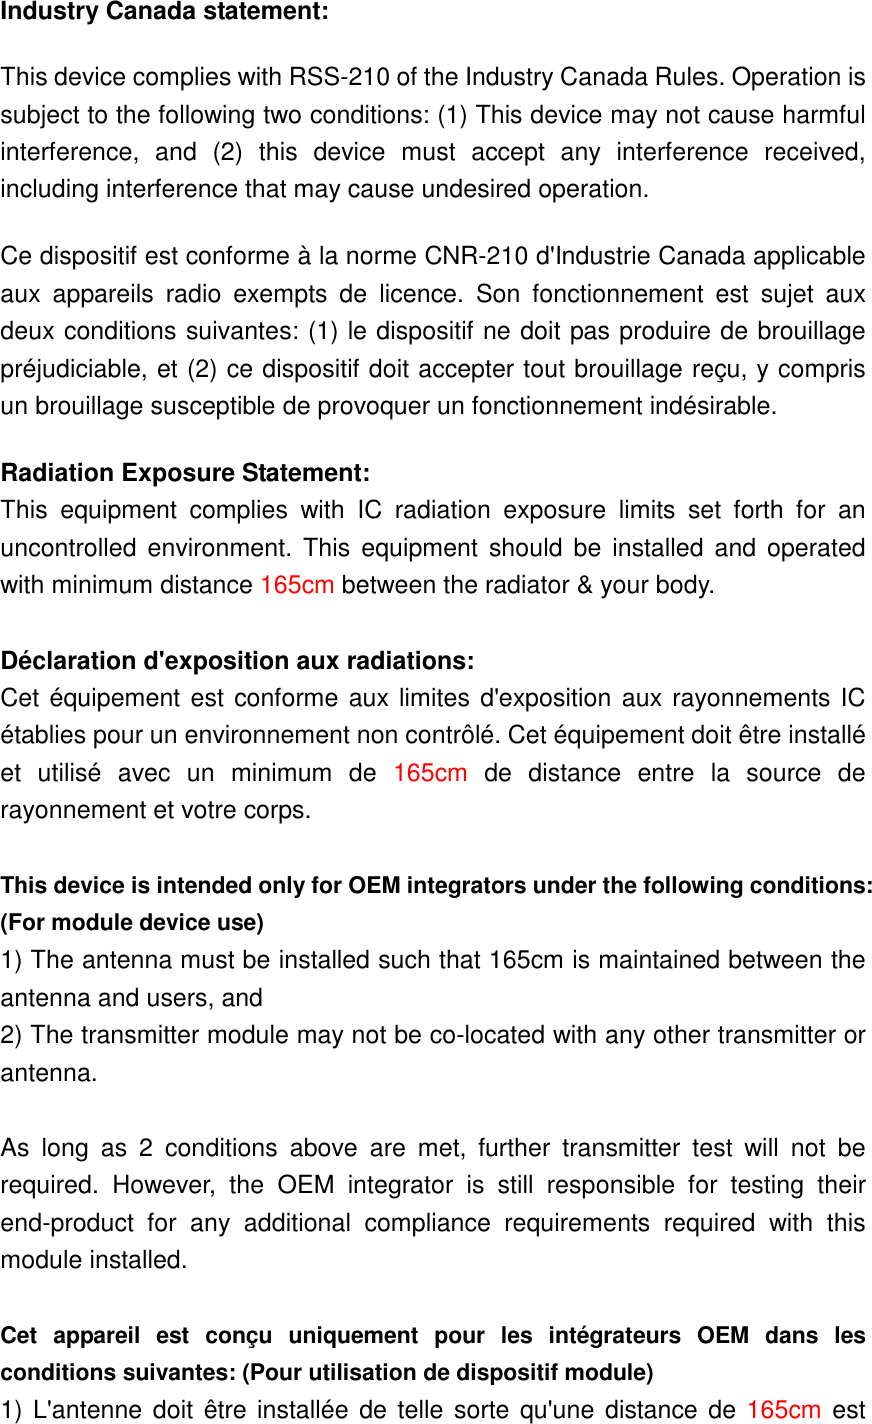 Industry Canada statement: This device complies with RSS-210 of the Industry Canada Rules. Operation is subject to the following two conditions: (1) This device may not cause harmful interference,  and  (2)  this  device  must  accept  any  interference  received, including interference that may cause undesired operation. Ce dispositif est conforme à la norme CNR-210 d&apos;Industrie Canada applicable aux  appareils  radio  exempts  de  licence.  Son  fonctionnement  est  sujet  aux deux conditions suivantes: (1) le dispositif ne doit pas produire de brouillage préjudiciable, et (2) ce dispositif doit accepter tout brouillage reçu, y compris un brouillage susceptible de provoquer un fonctionnement indésirable.   Radiation Exposure Statement: This  equipment  complies  with  IC  radiation  exposure  limits  set  forth  for  an uncontrolled  environment.  This  equipment  should  be  installed and  operated with minimum distance 165cm between the radiator &amp; your body.  Déclaration d&apos;exposition aux radiations: Cet équipement est conforme aux limites d&apos;exposition aux rayonnements IC établies pour un environnement non contrôlé. Cet équipement doit être installé et  utilisé  avec  un  minimum  de  165cm  de  distance  entre  la  source  de rayonnement et votre corps.  This device is intended only for OEM integrators under the following conditions: (For module device use) 1) The antenna must be installed such that 165cm is maintained between the antenna and users, and   2) The transmitter module may not be co-located with any other transmitter or antenna.  As  long  as  2  conditions  above  are  met,  further  transmitter  test  will  not  be required.  However,  the  OEM  integrator  is  still  responsible  for  testing  their end-product  for  any  additional  compliance  requirements  required  with  this module installed.  Cet  appareil  est  conçu  uniquement  pour  les  intégrateurs  OEM  dans  les conditions suivantes: (Pour utilisation de dispositif module) 1) L&apos;antenne  doit être installée  de telle sorte qu&apos;une  distance de 165cm est 